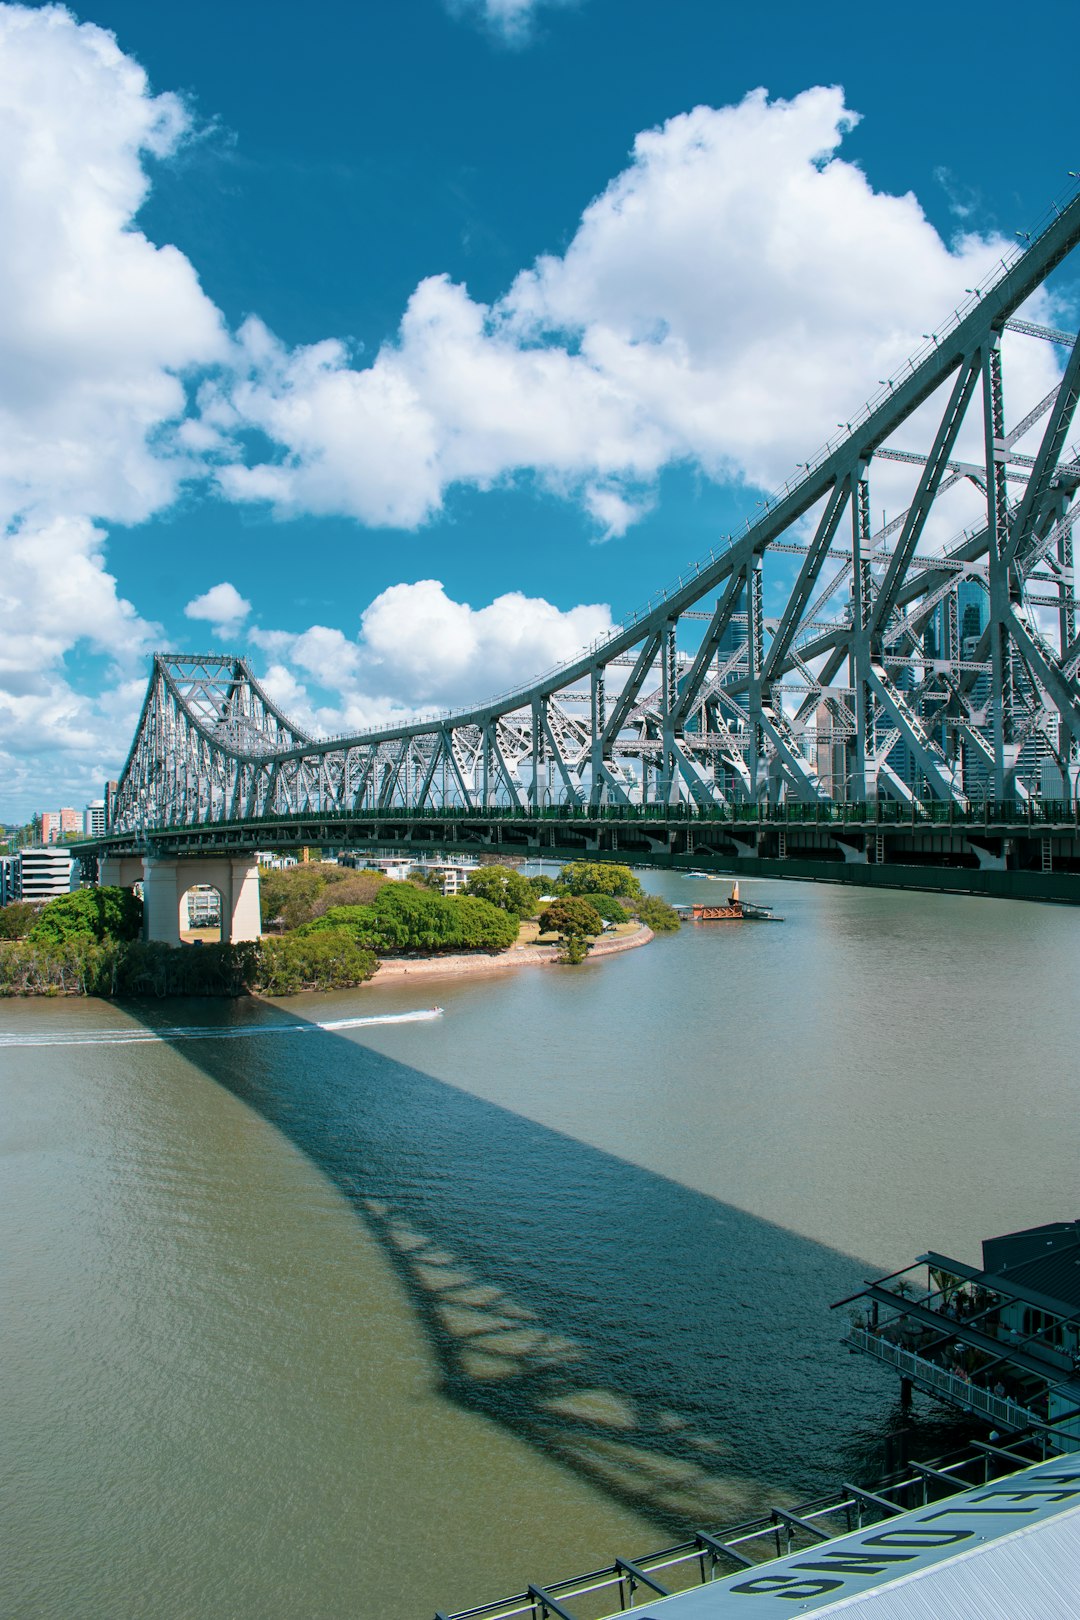 Travel Tips and Stories of Story Bridge in Australia